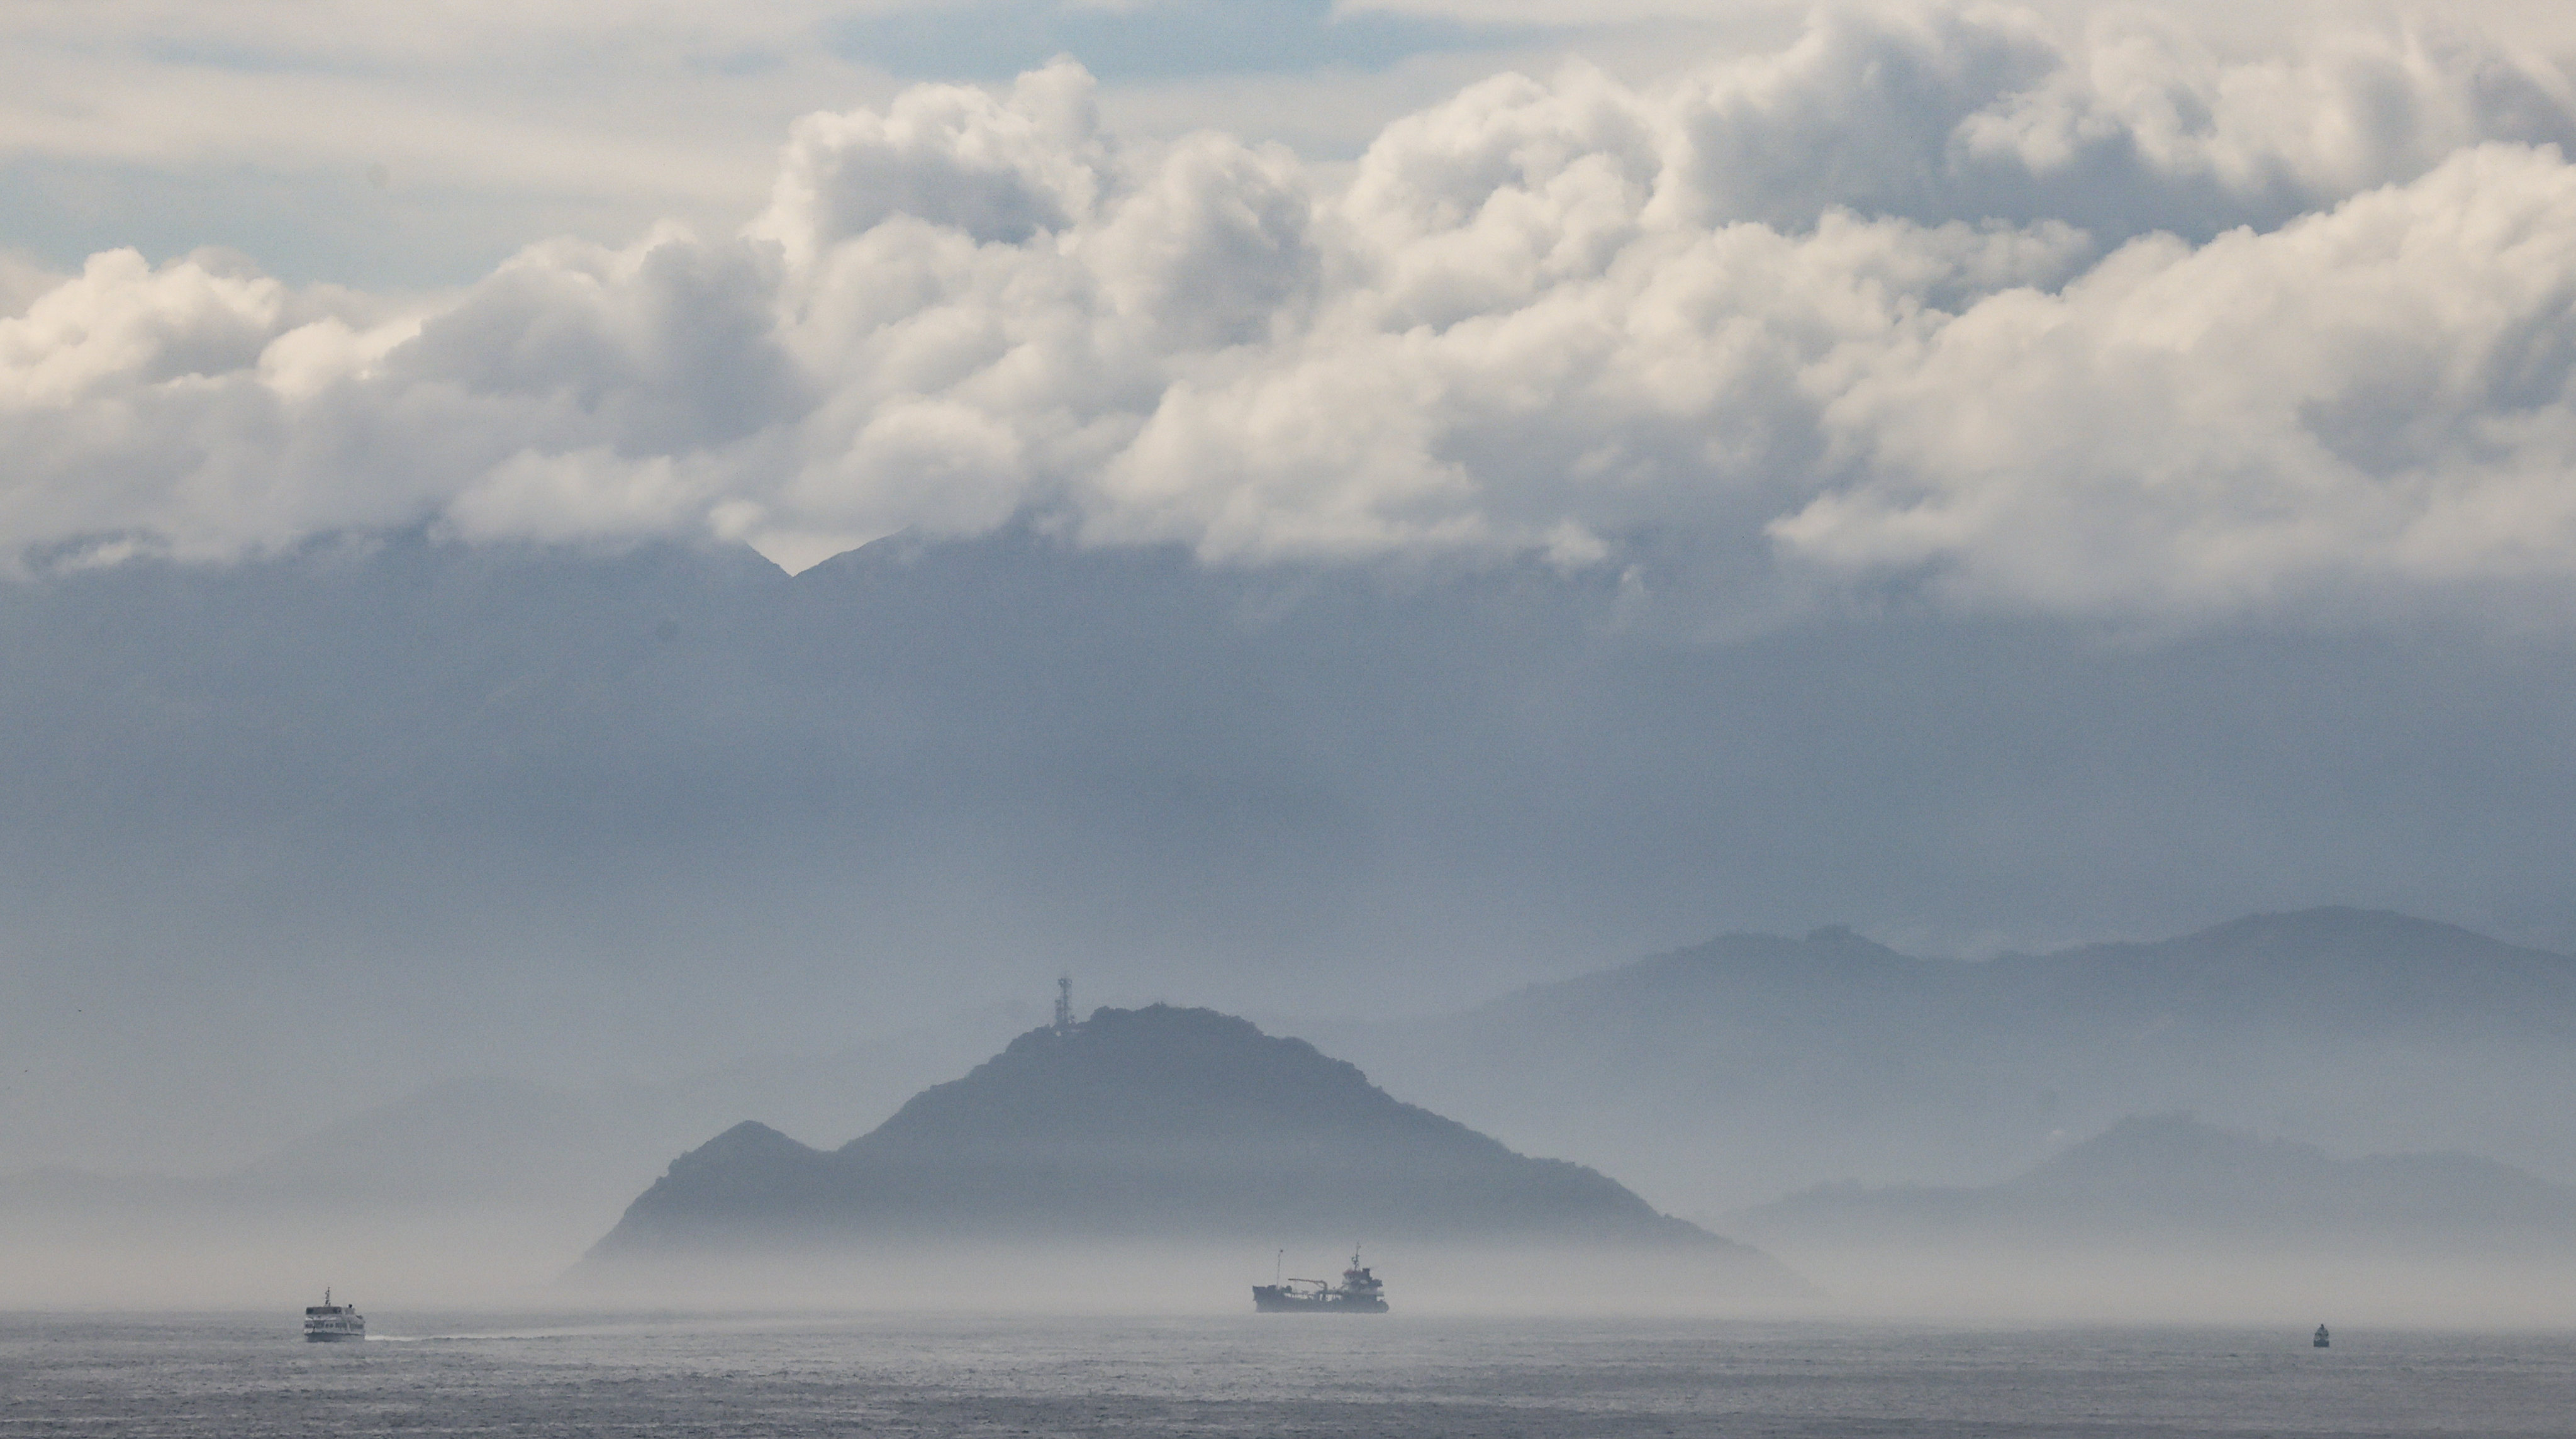 The sea facing Kau Yi Chau is shrouded in mist on February 10. Given its immense cost, complexity and risks, the government must think through the Kau Yi Chau Artificial Islands project before starting work. Photo: Jelly Tse